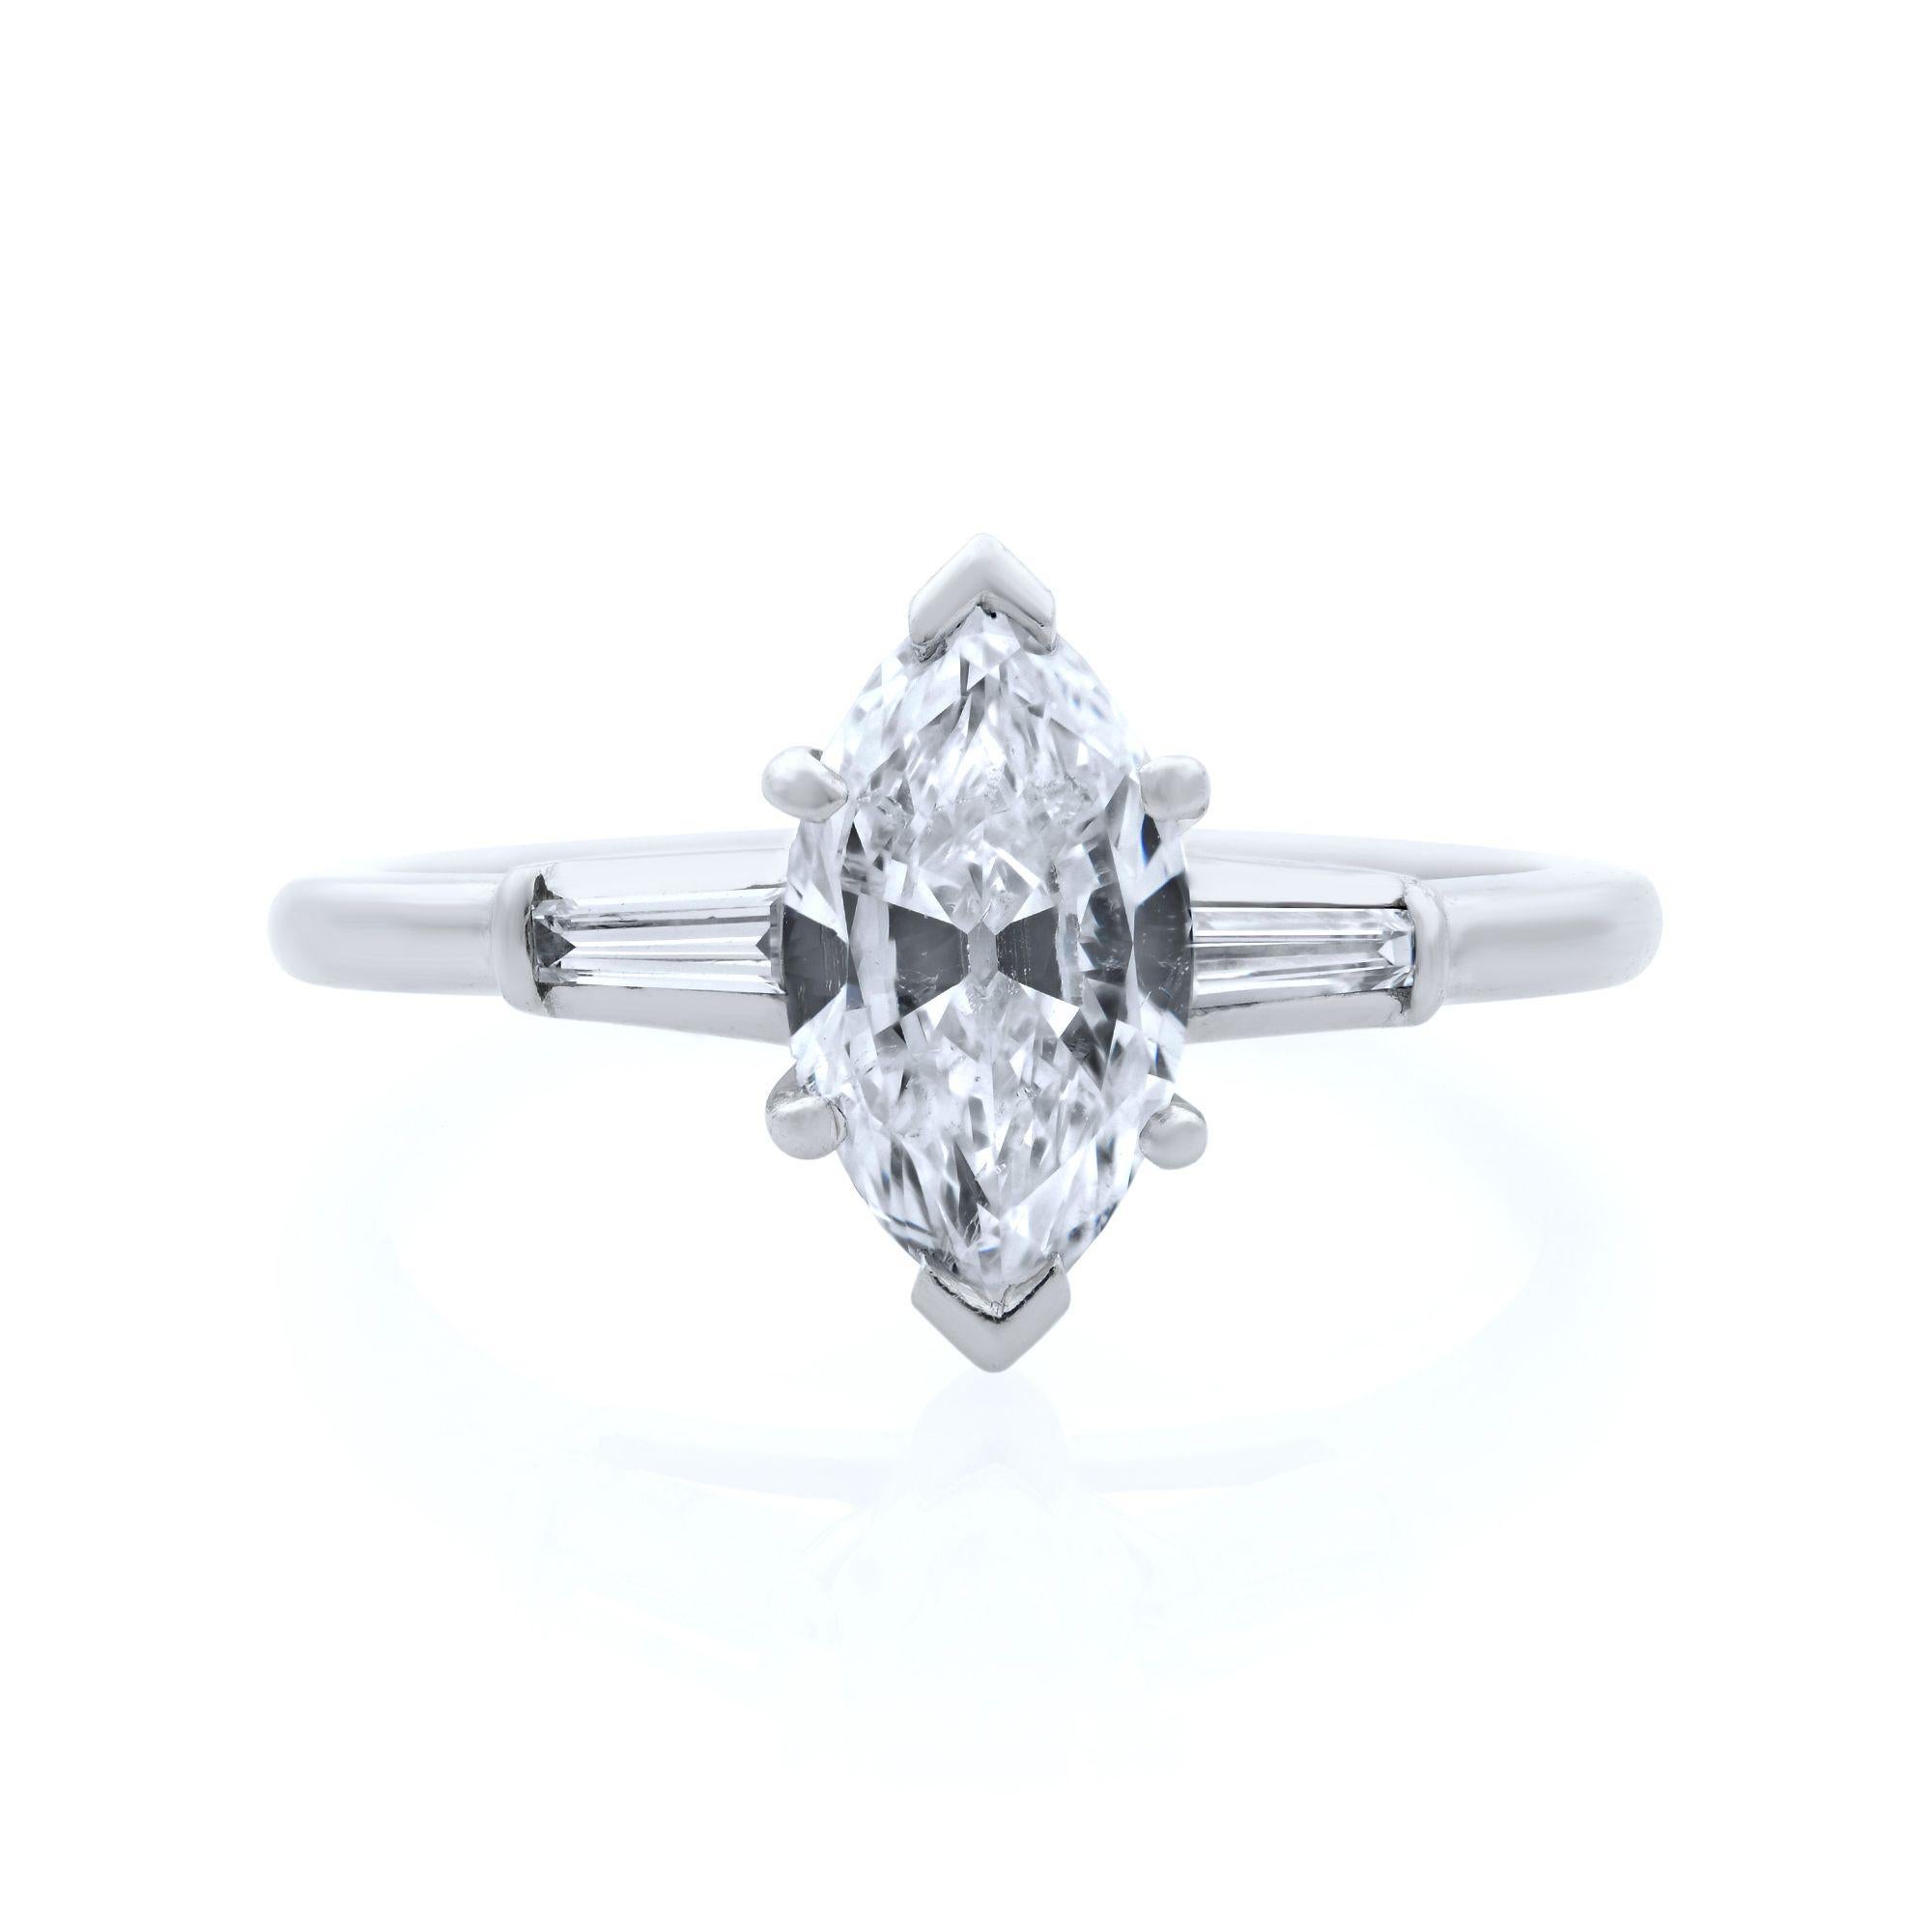 This engagement ring features a marquise cut diamond in the center with a tiny baguette cut diamonds on each side. Center stone 1.00 carat. Diamond color G and SI1 clarity. Ring size 6 (can be sized). This ring comes in our jewelry presentation box.